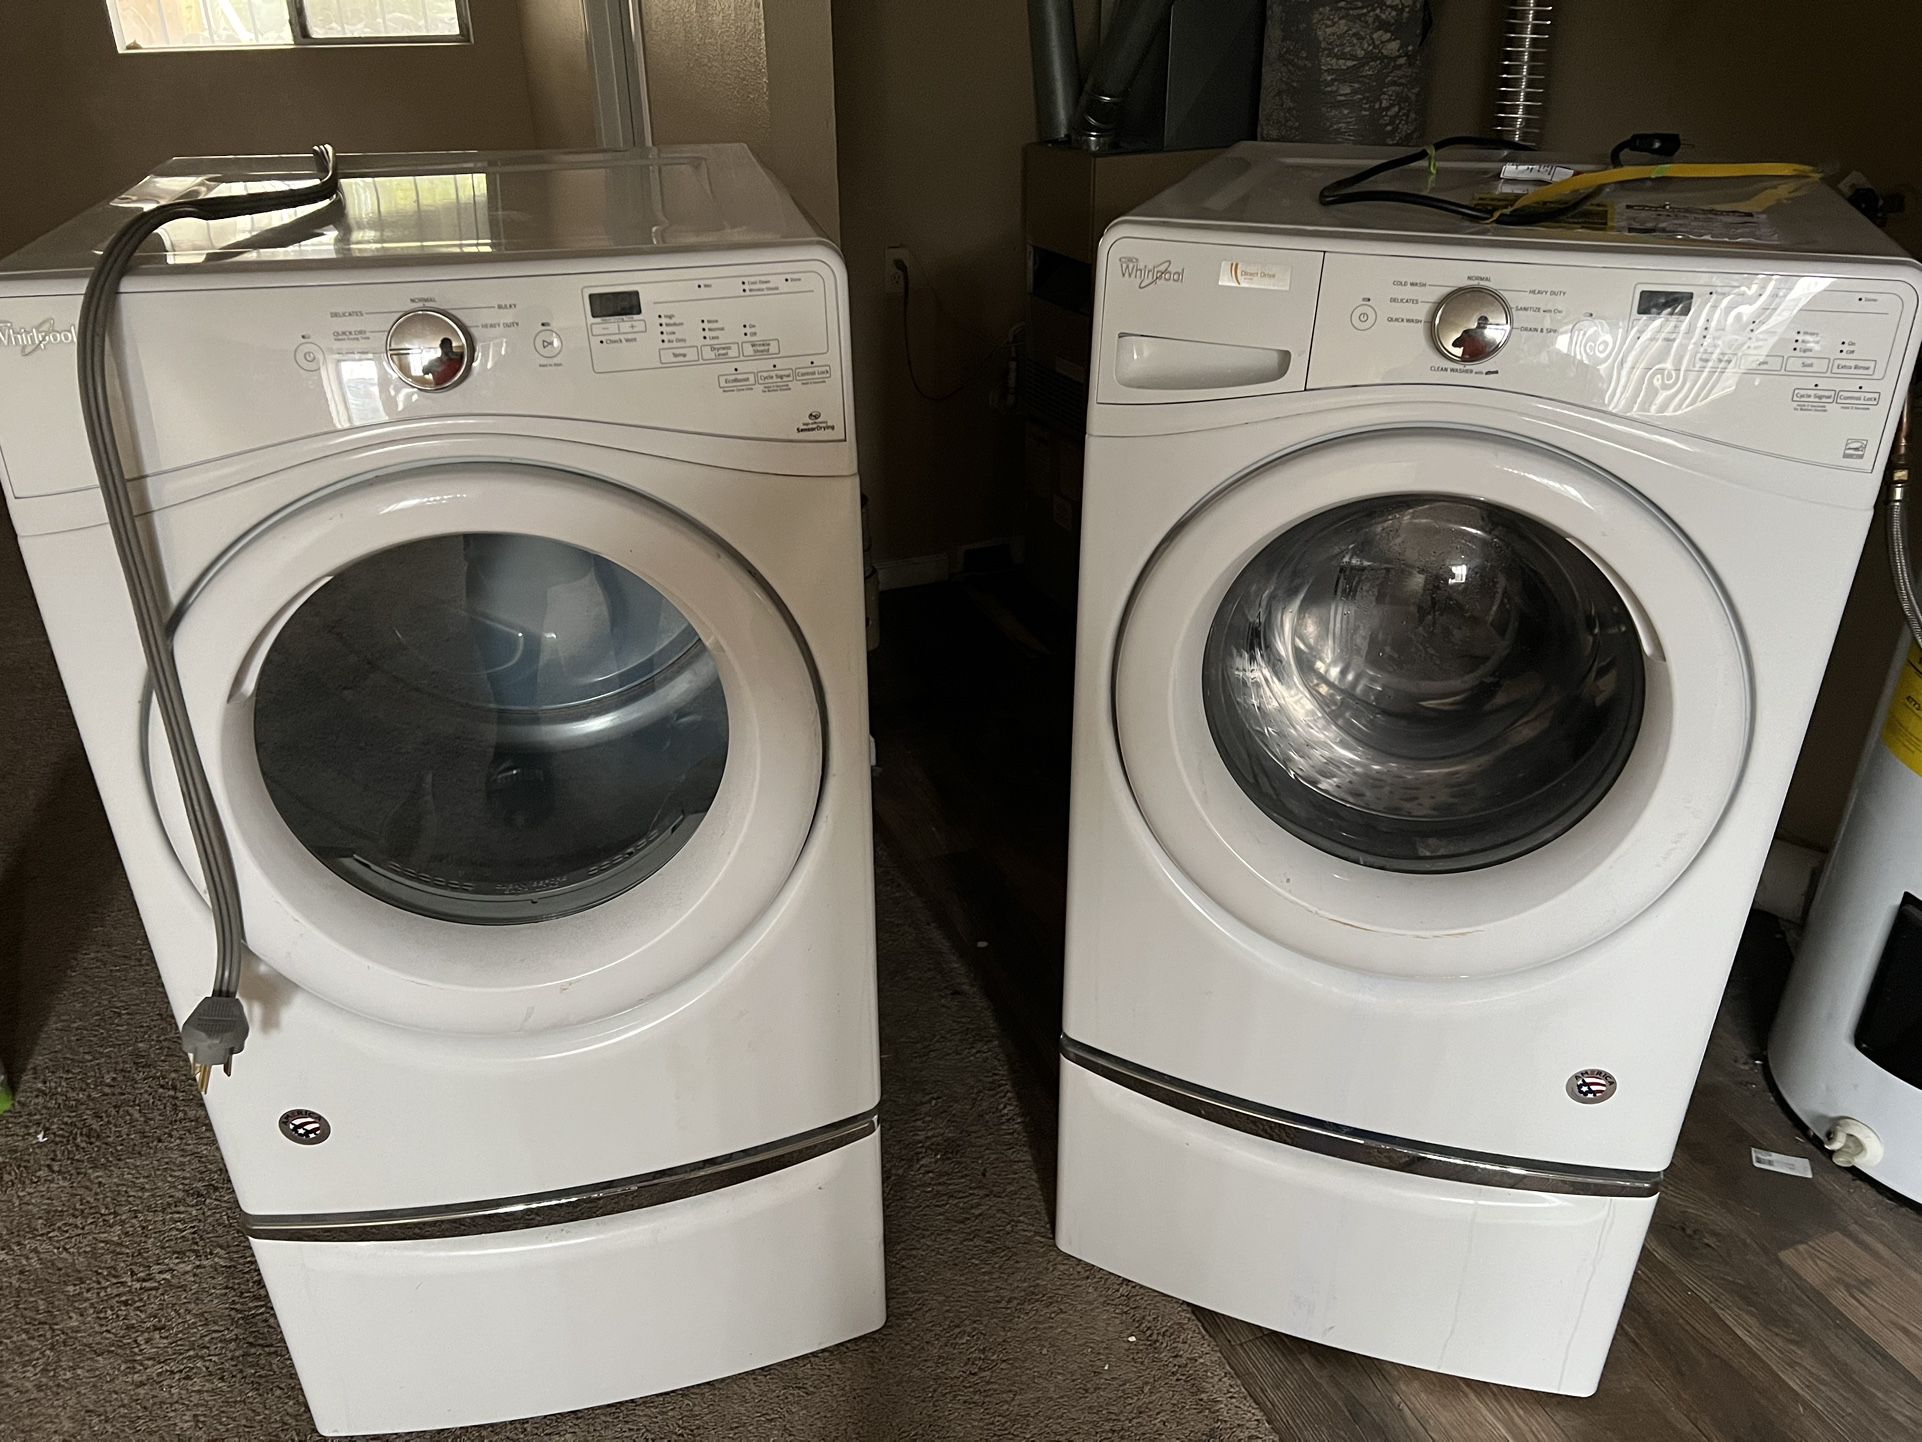 Electric Washer & Dryer 